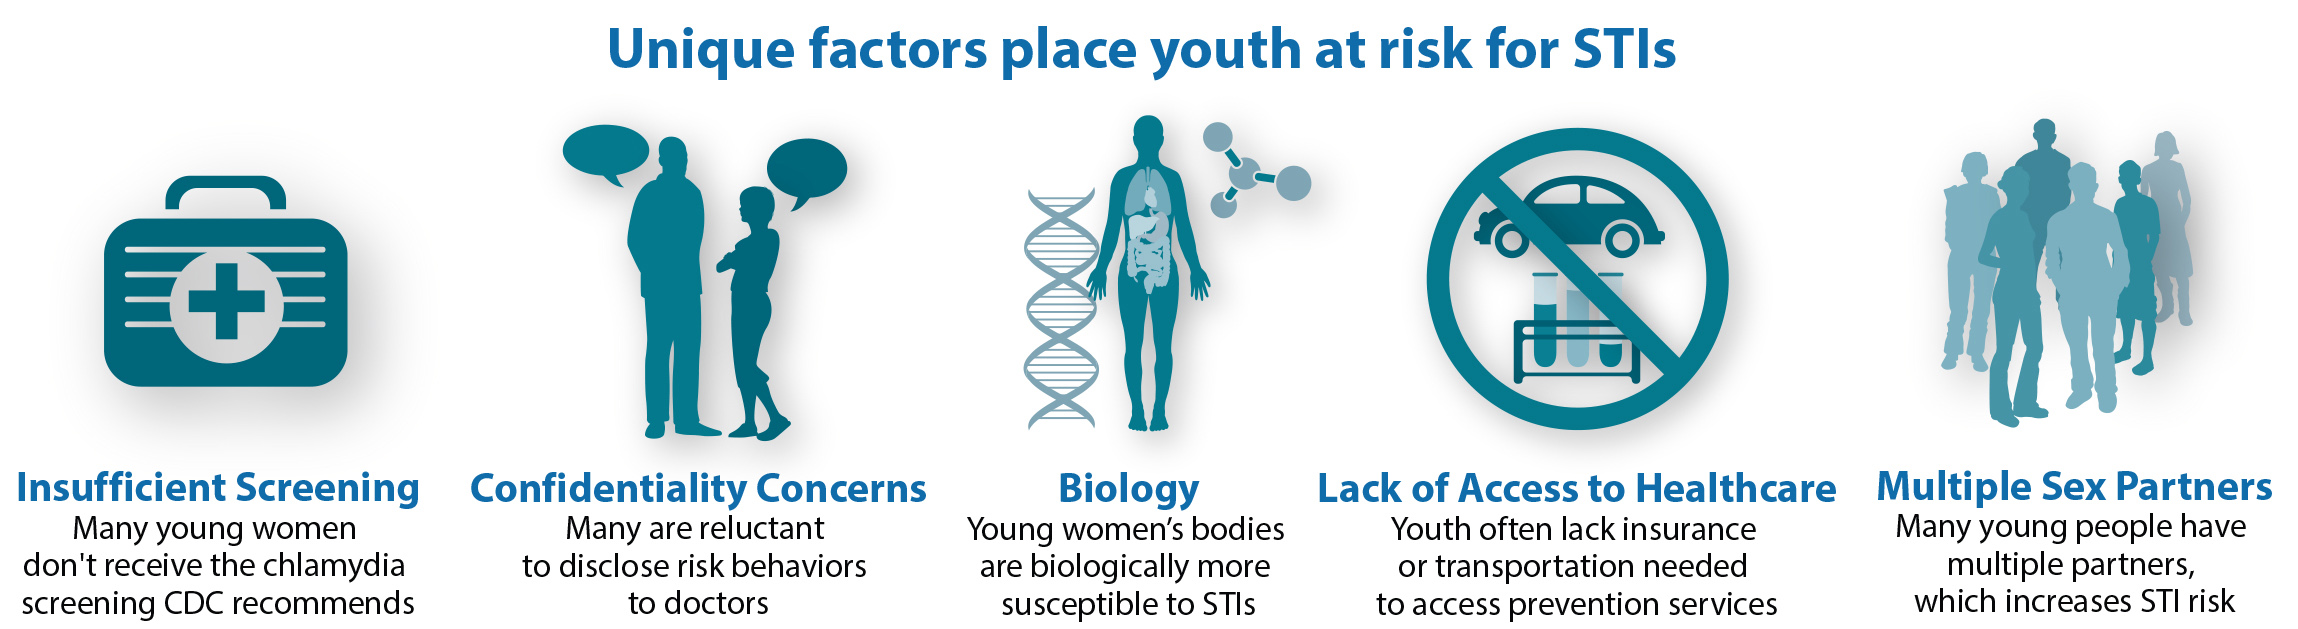 An infographic with text and simple blue illustrations showing the Unique factors that place youth at risk for STIs